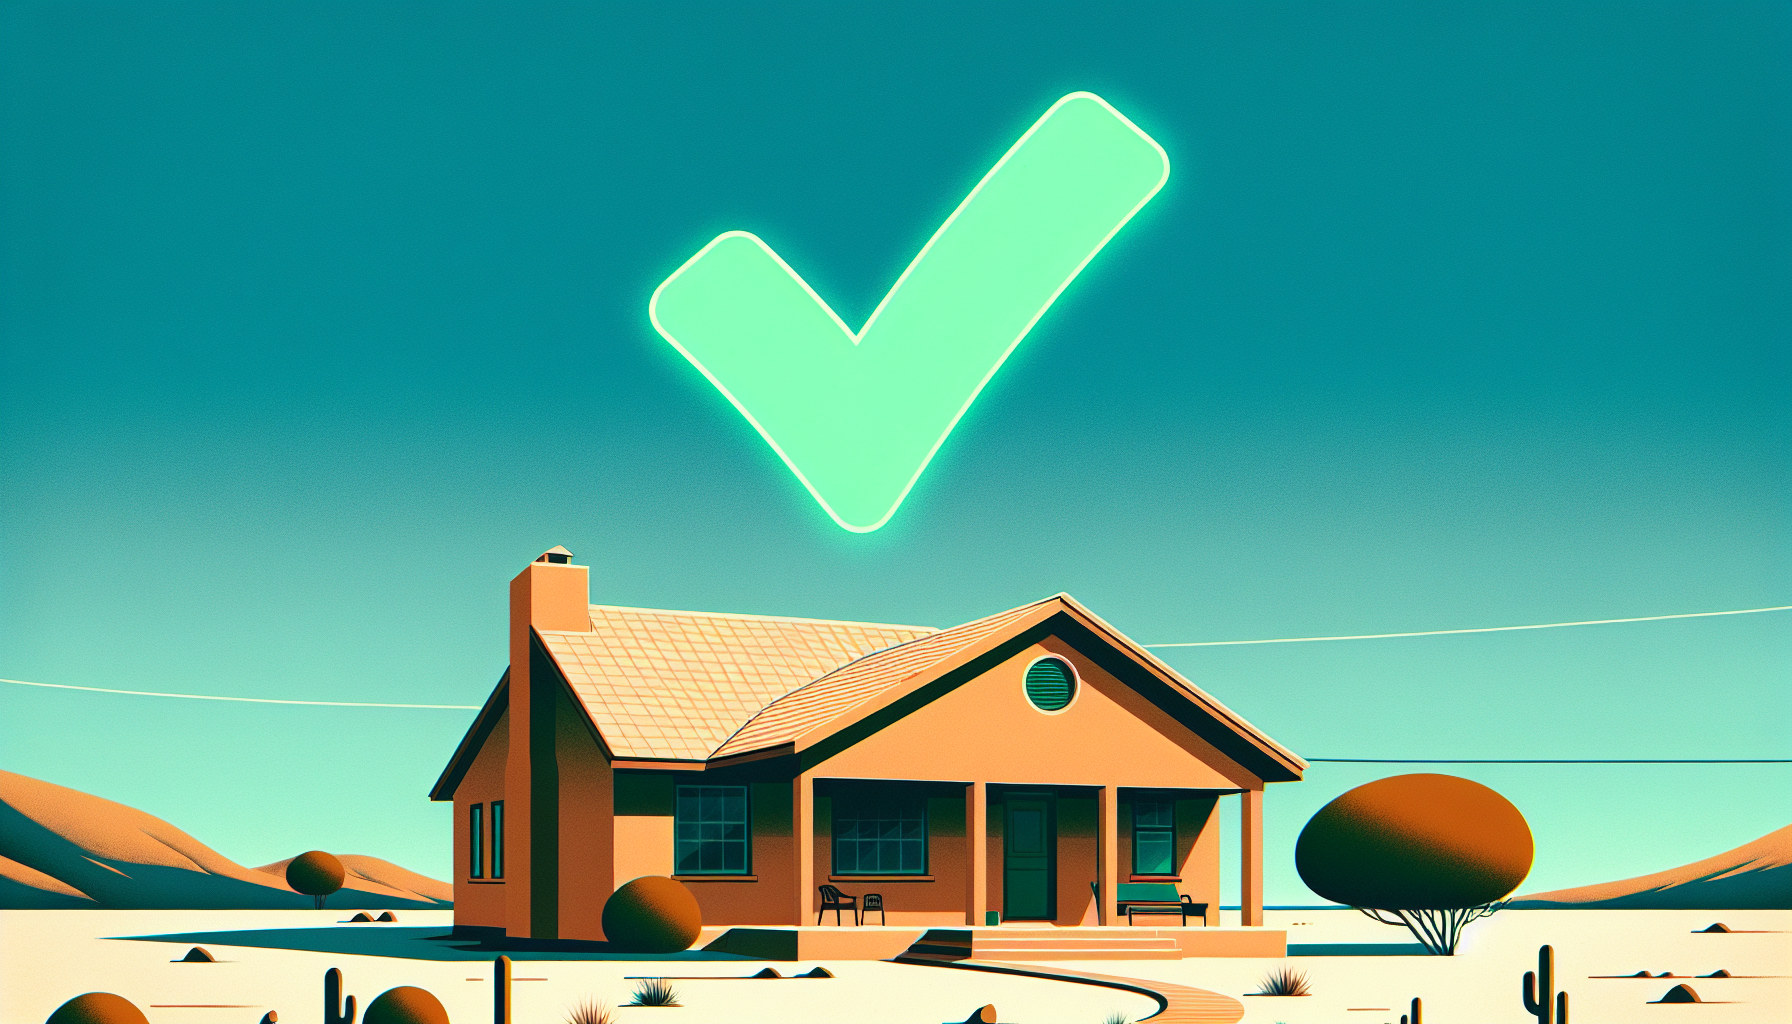 Illustration of a house with a checkmark indicating exemption